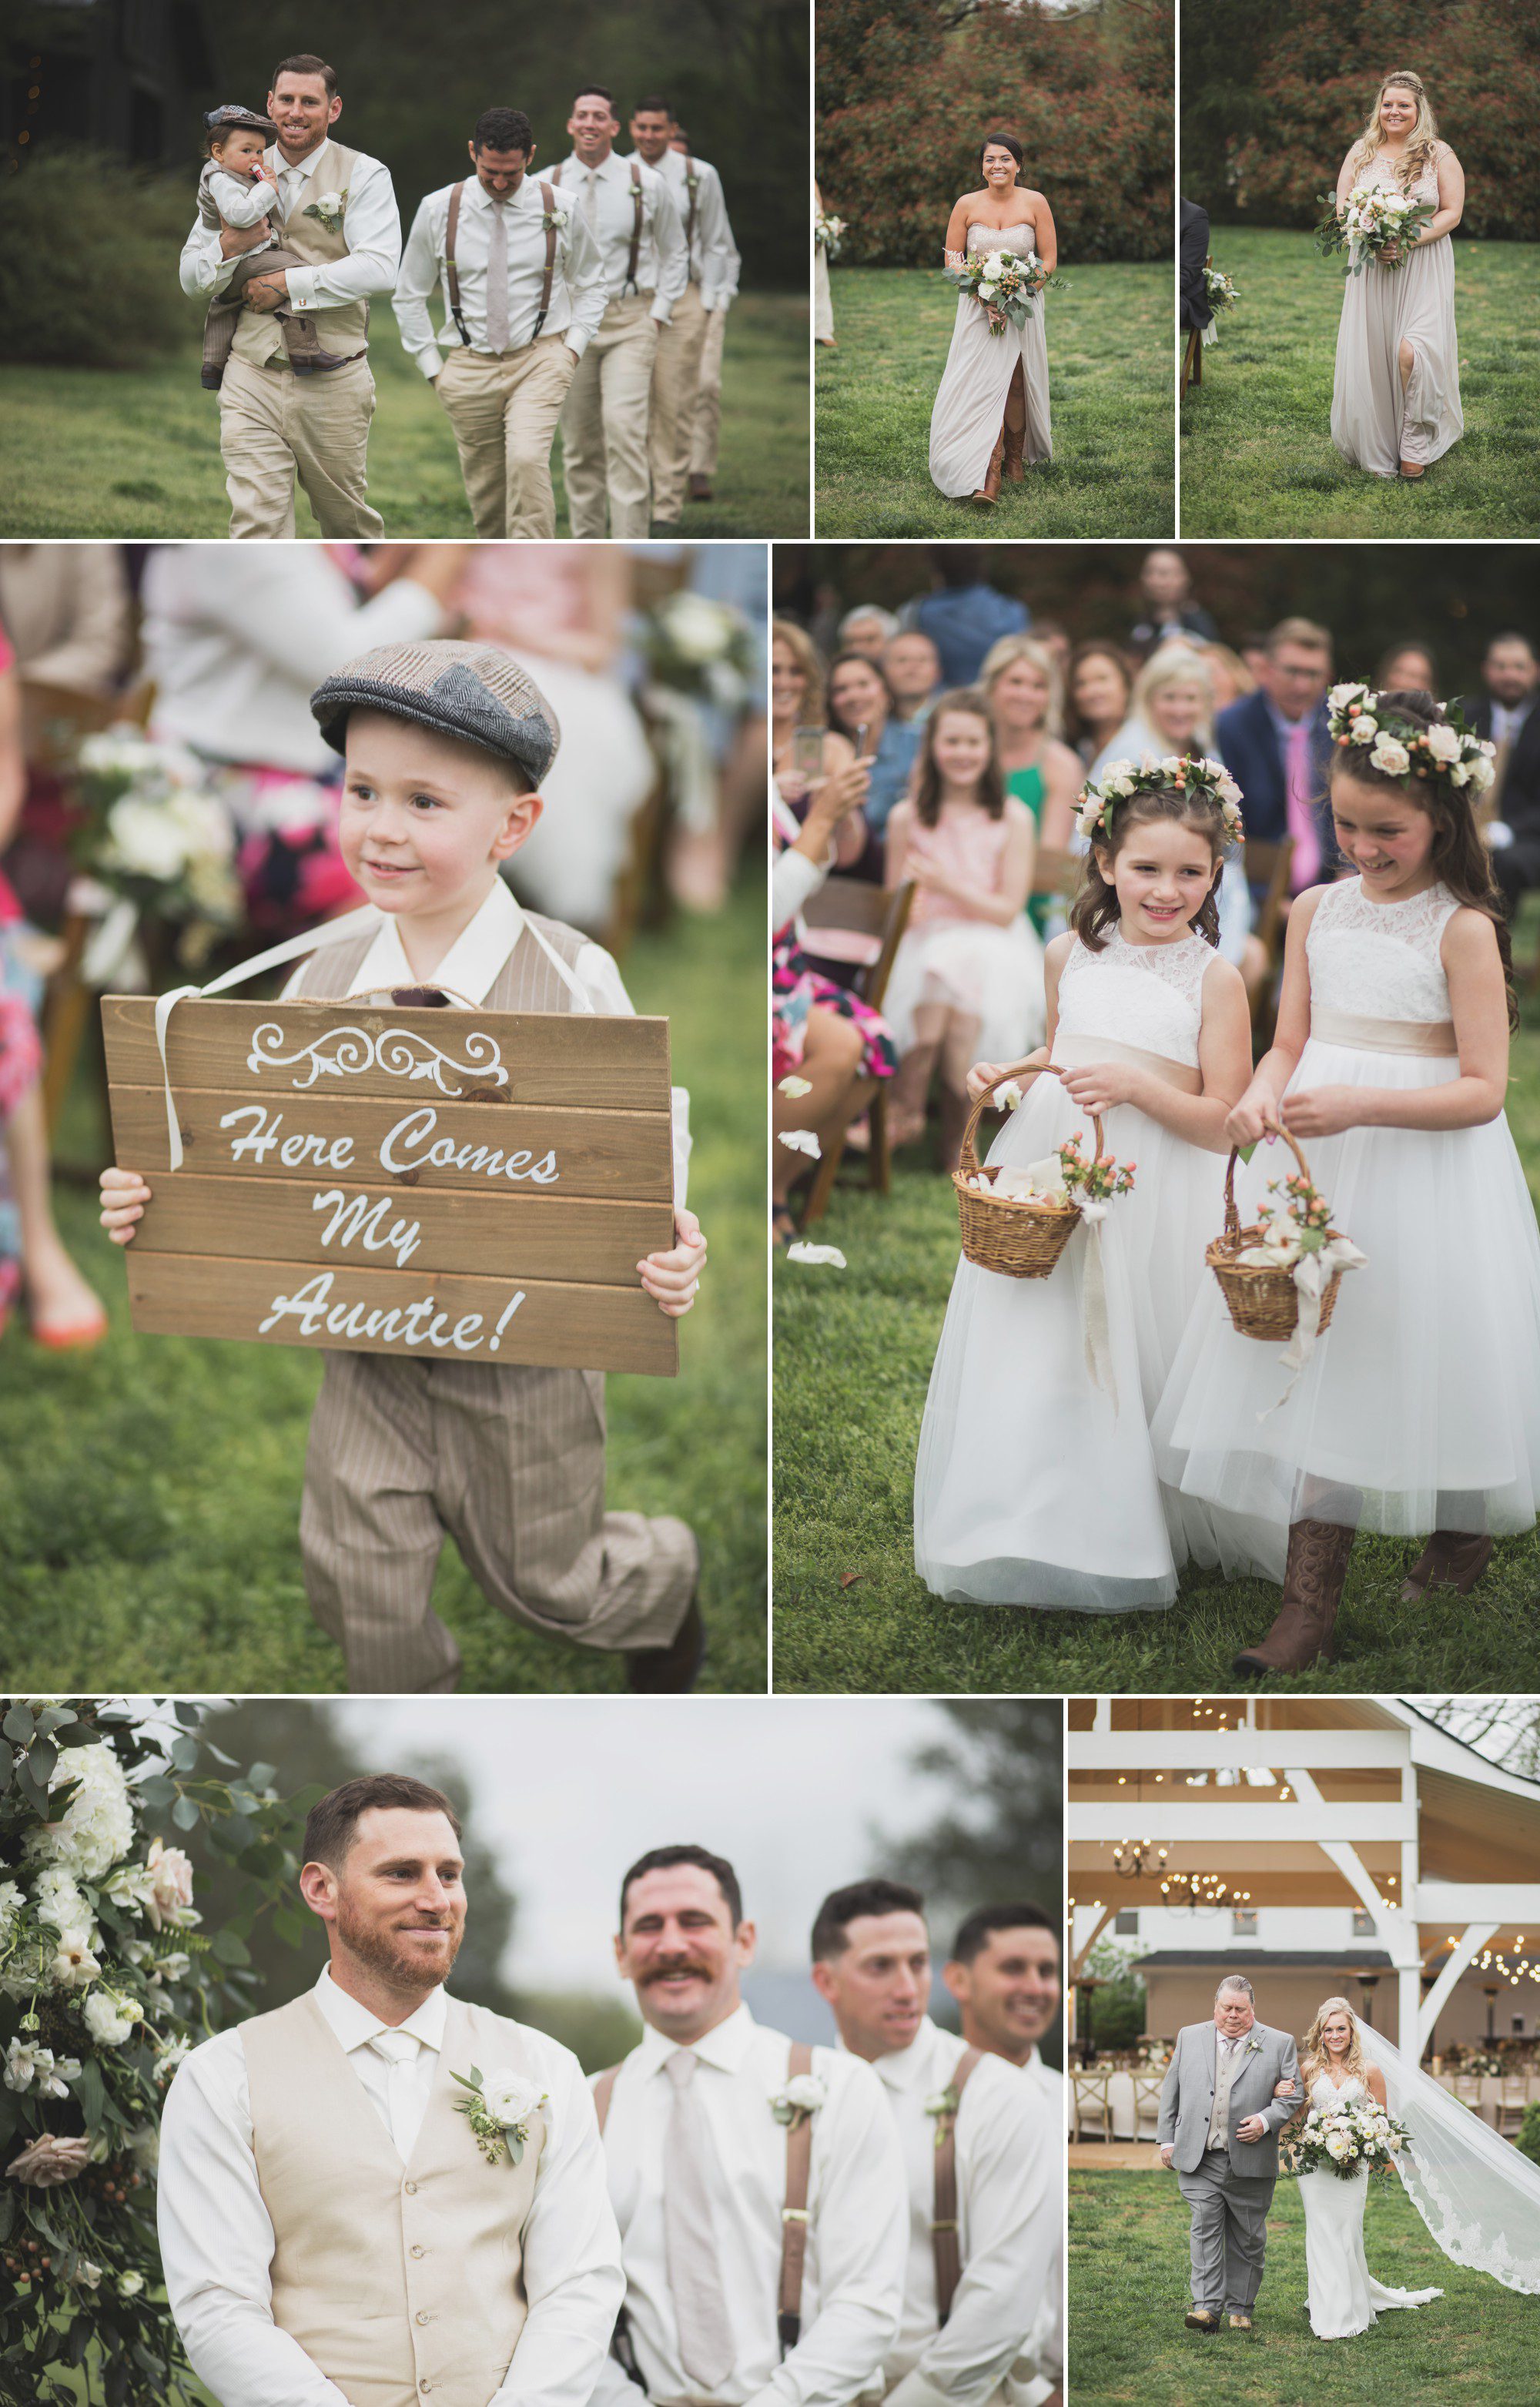 Procession of bridesmaids and flower girl, ring bearer before the wedding ceremony at Cedarwood weddings in Nashville, TN. April spring wedding, photos by Krista Lee Photography.